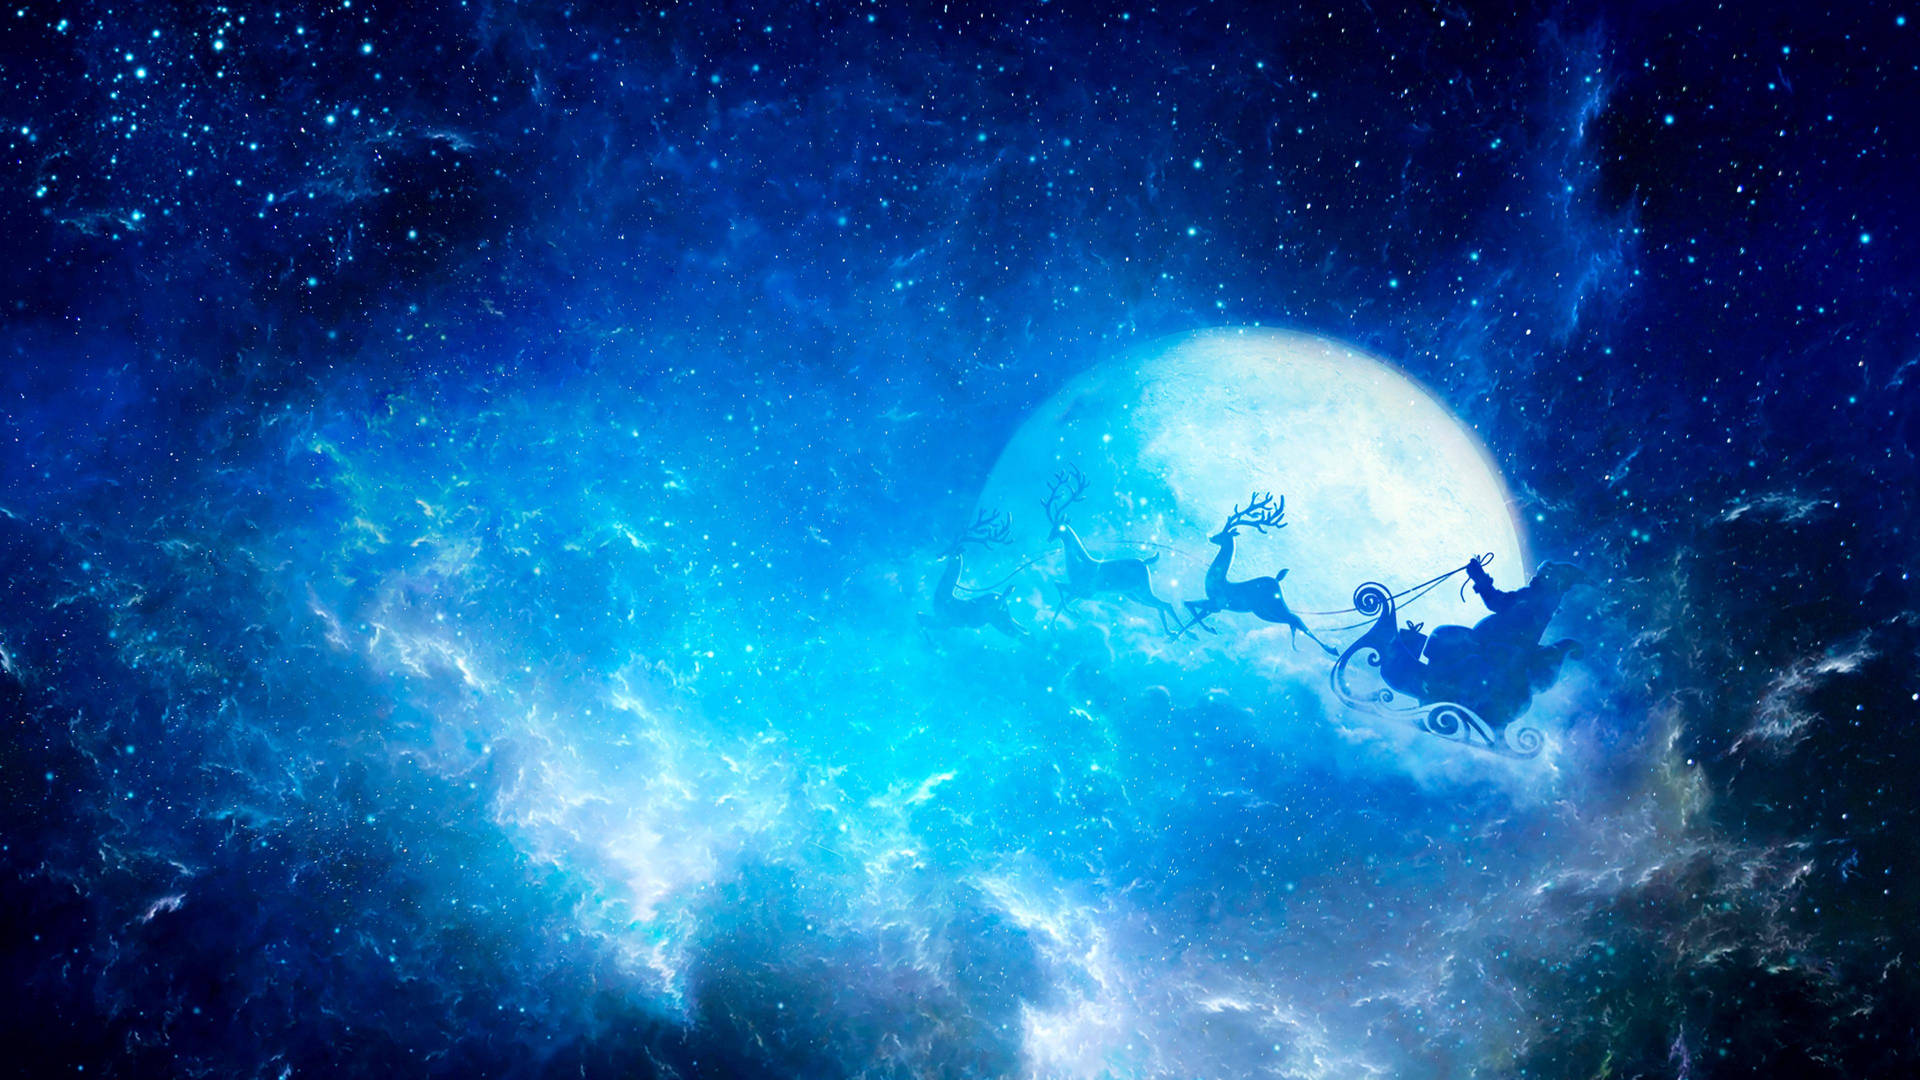 Santa Claus Flying Through The Sky With A Blue Moon Background